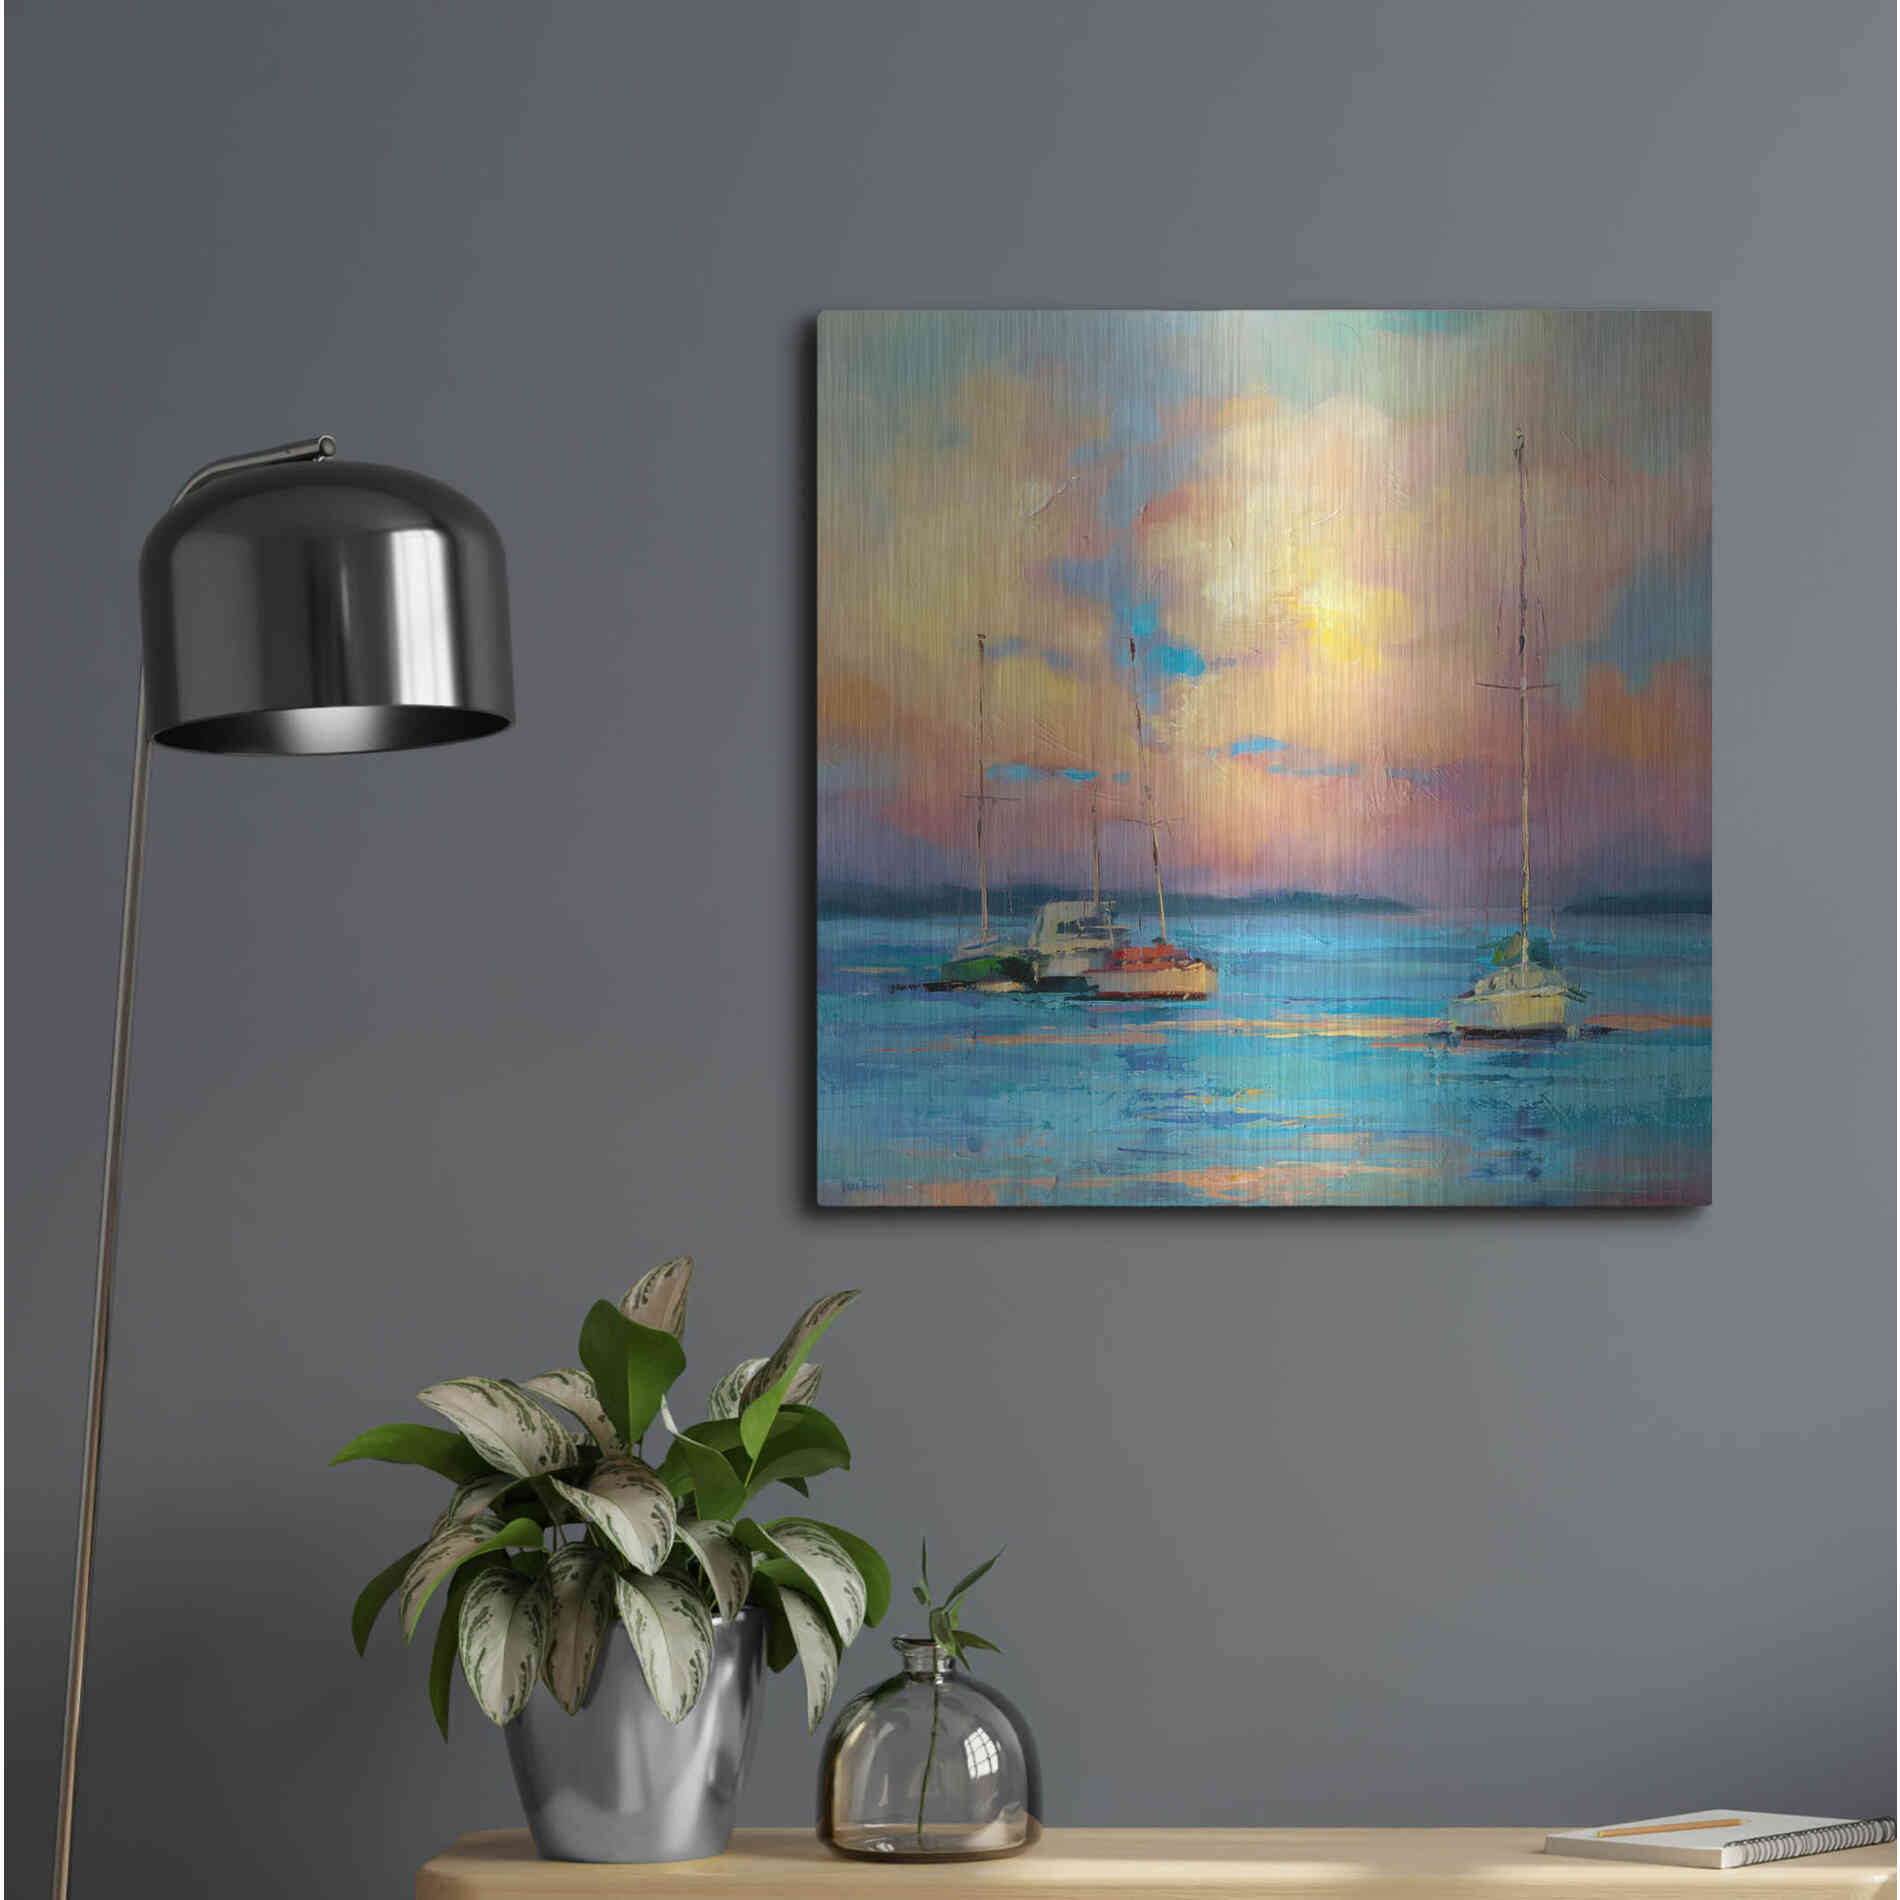 Luxe Metal Art 'After The Sailing Day' by Kasia Bruniany Metal Wall Art,24x24